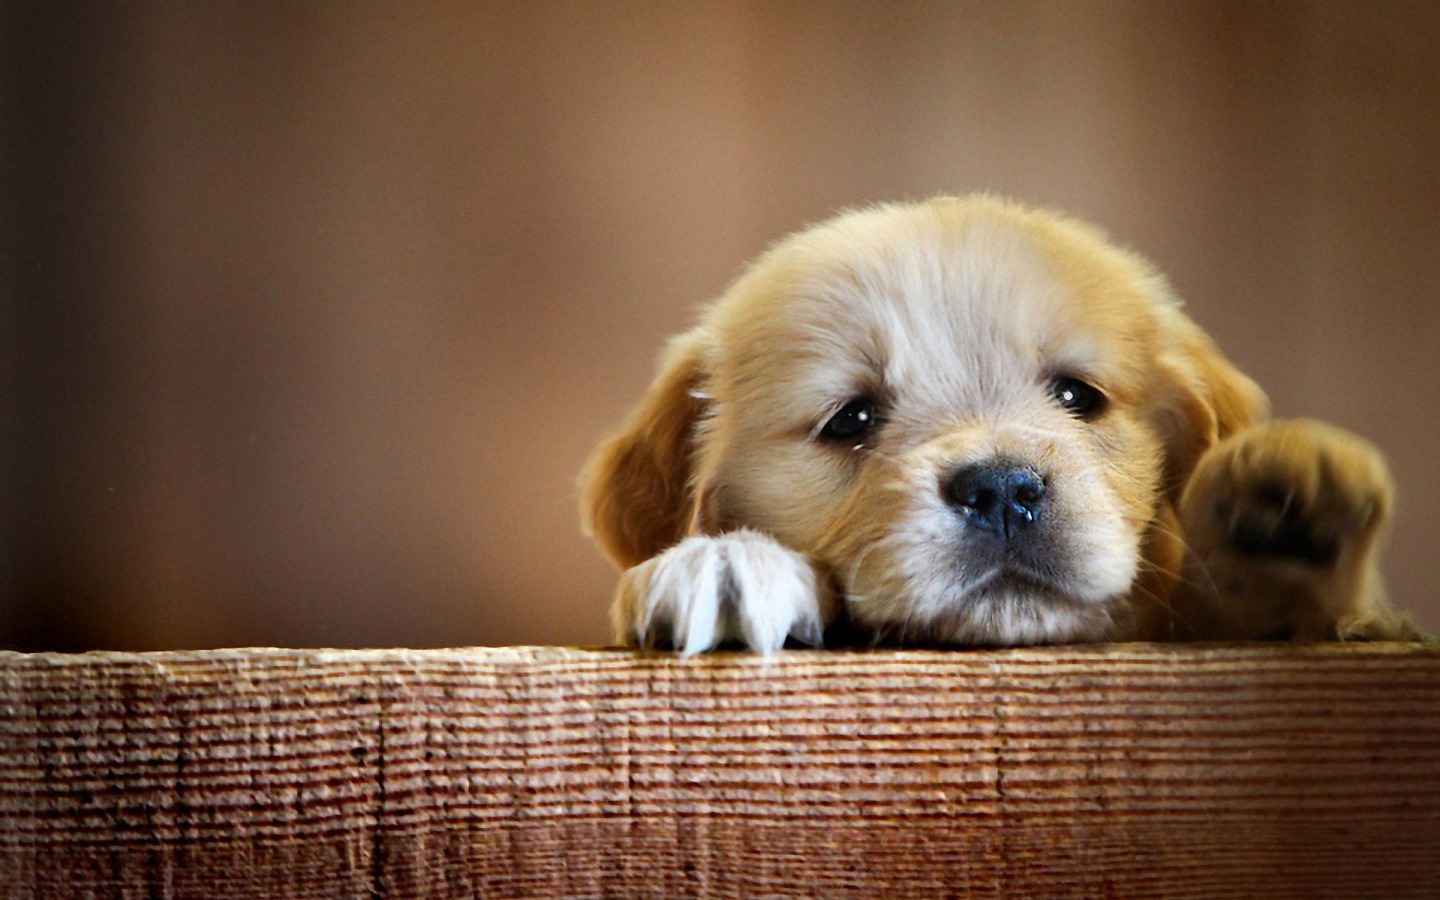 A puppy looking over a couch and sticking its paw up.